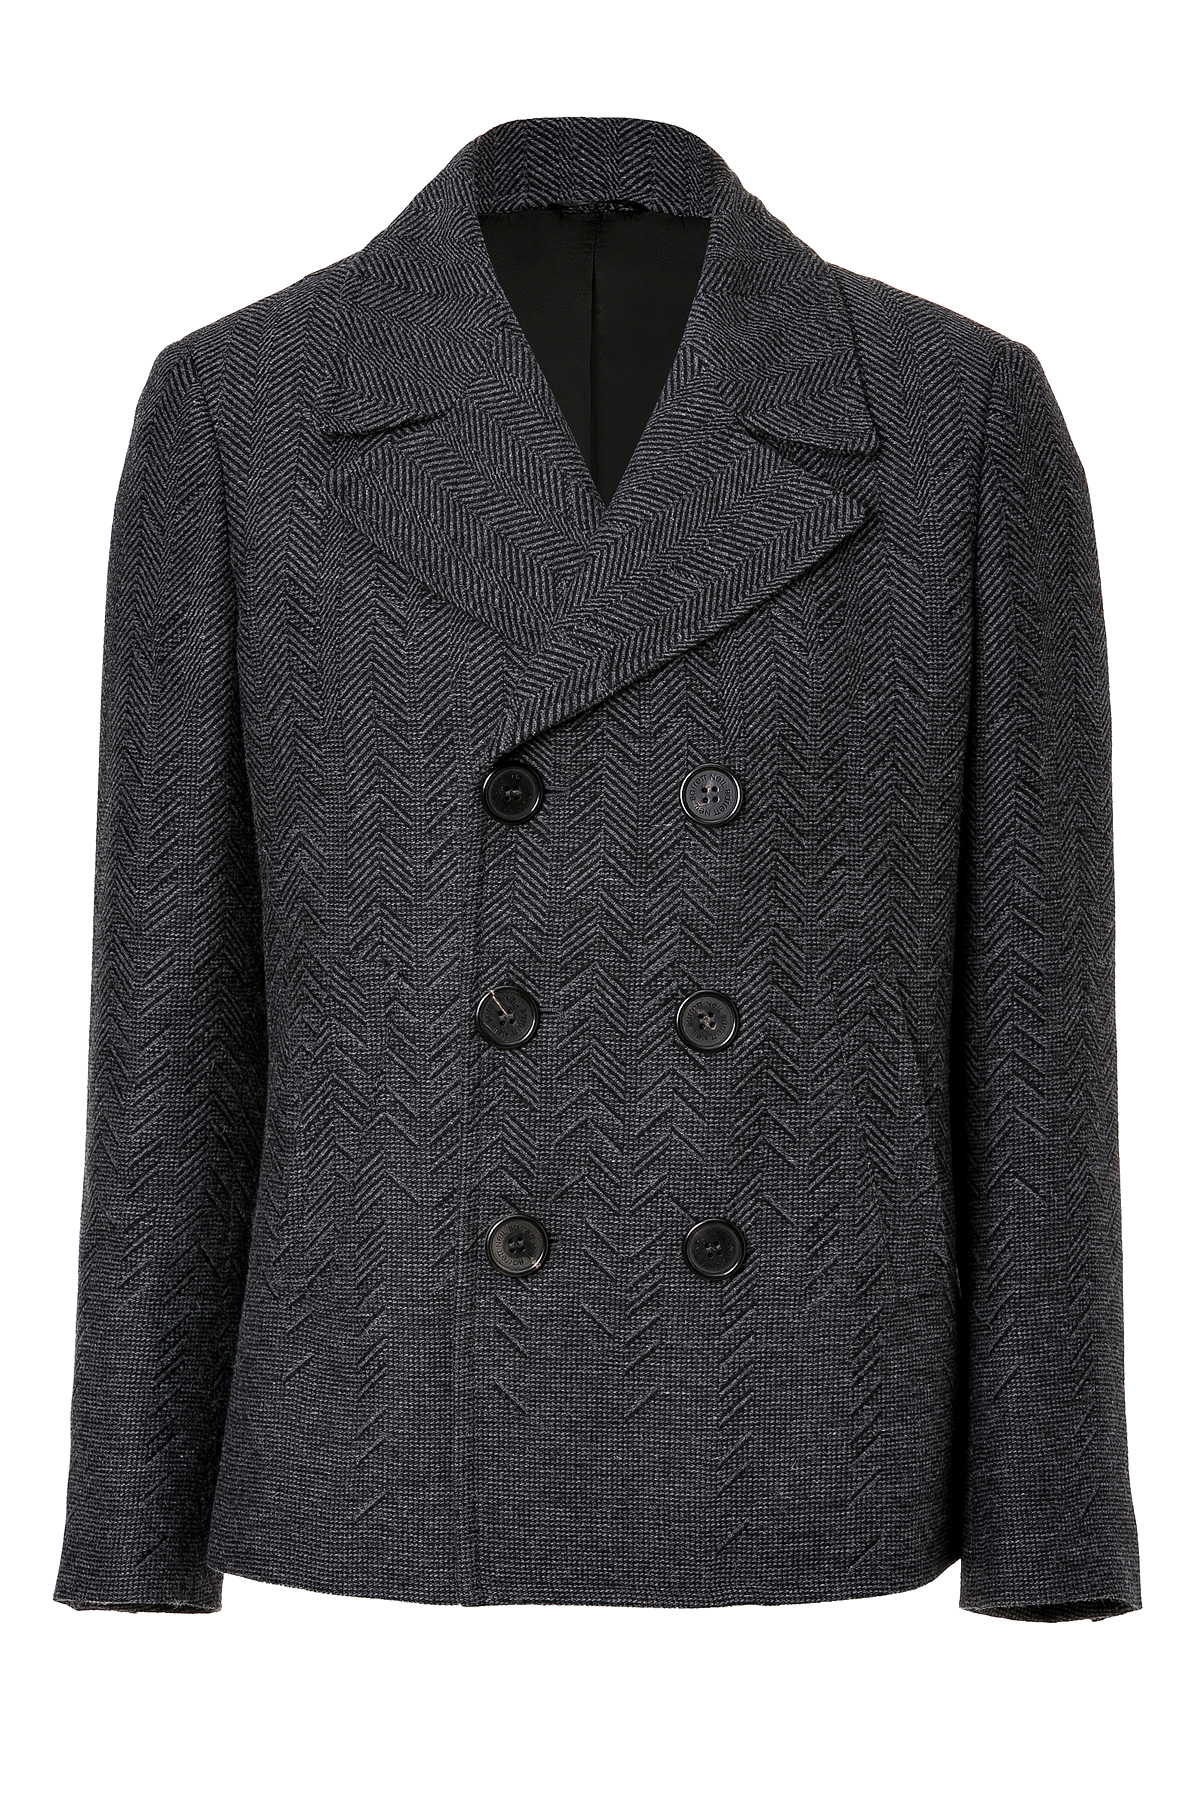 Neil Barrett Charcoal Houndstooth Pea Coat in Gray for Men (charcoal ...